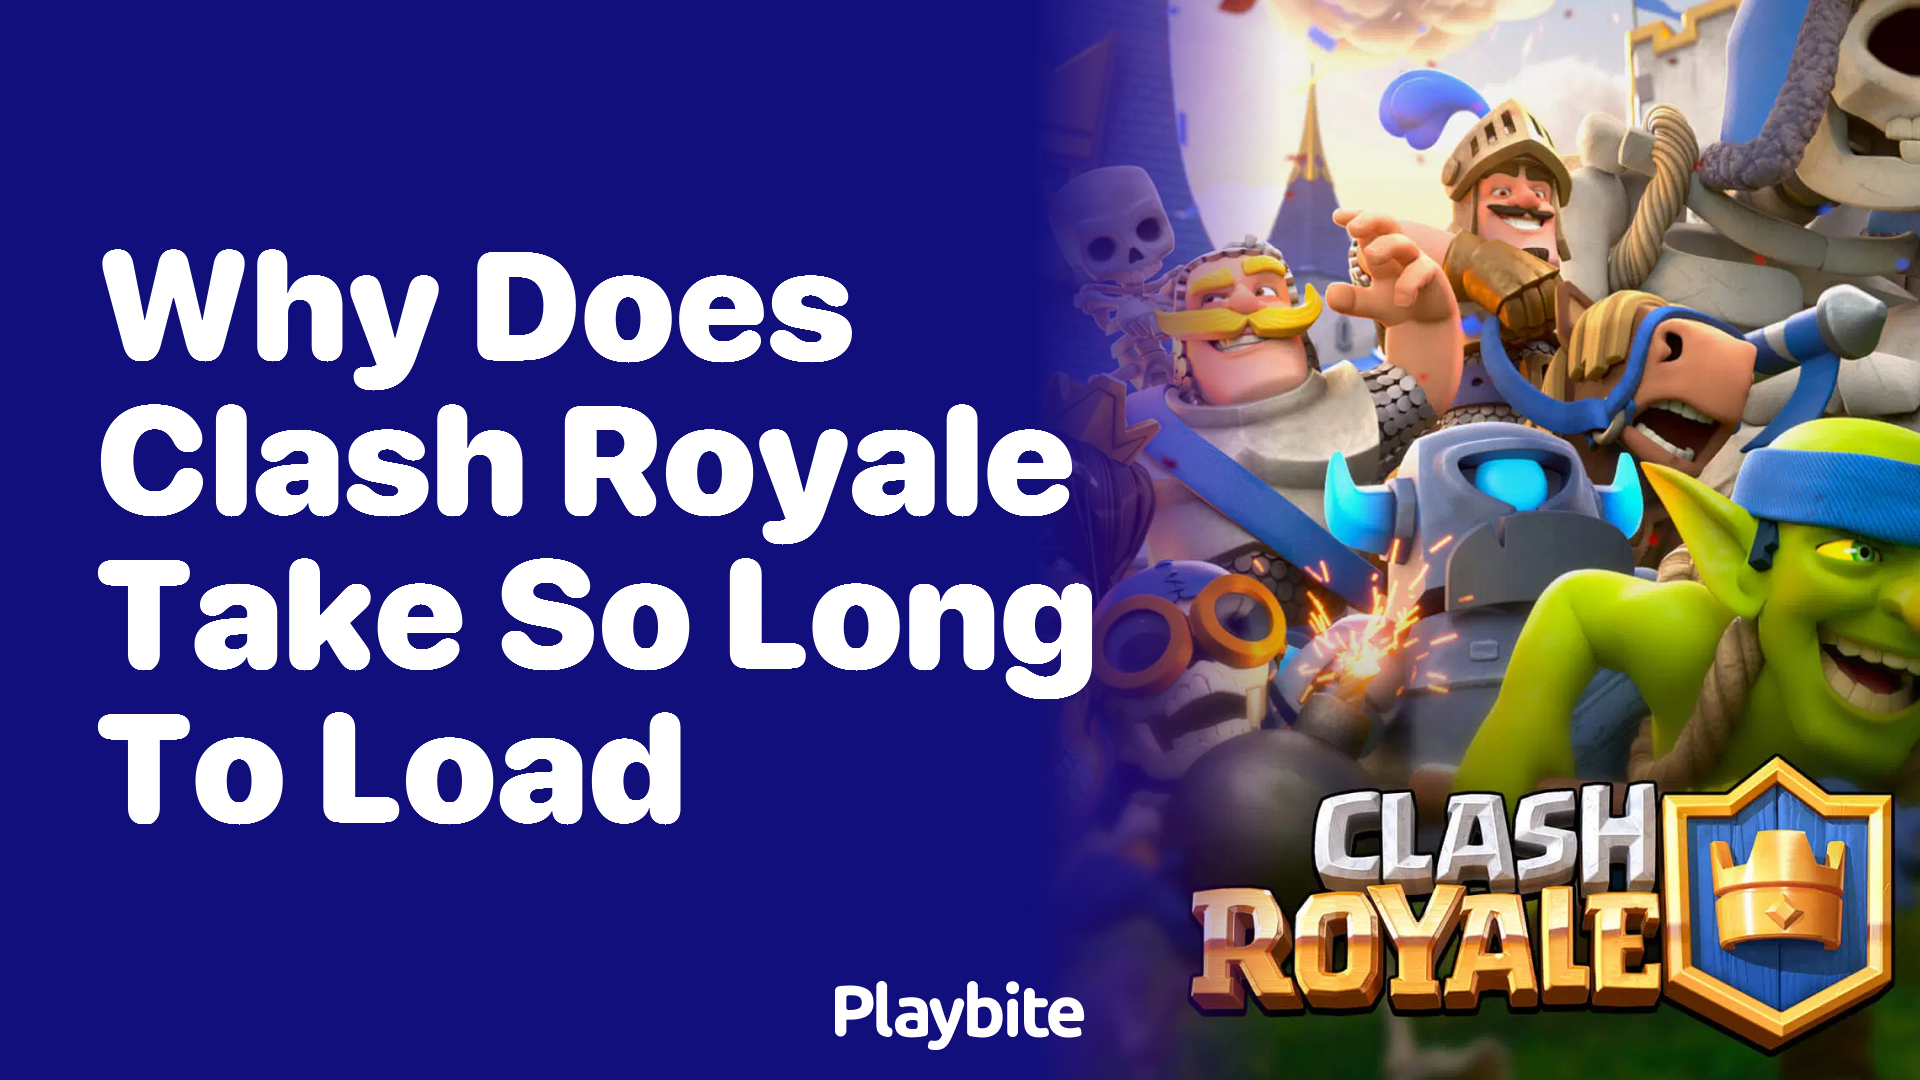 Why Does Clash Royale Take So Long to Load?